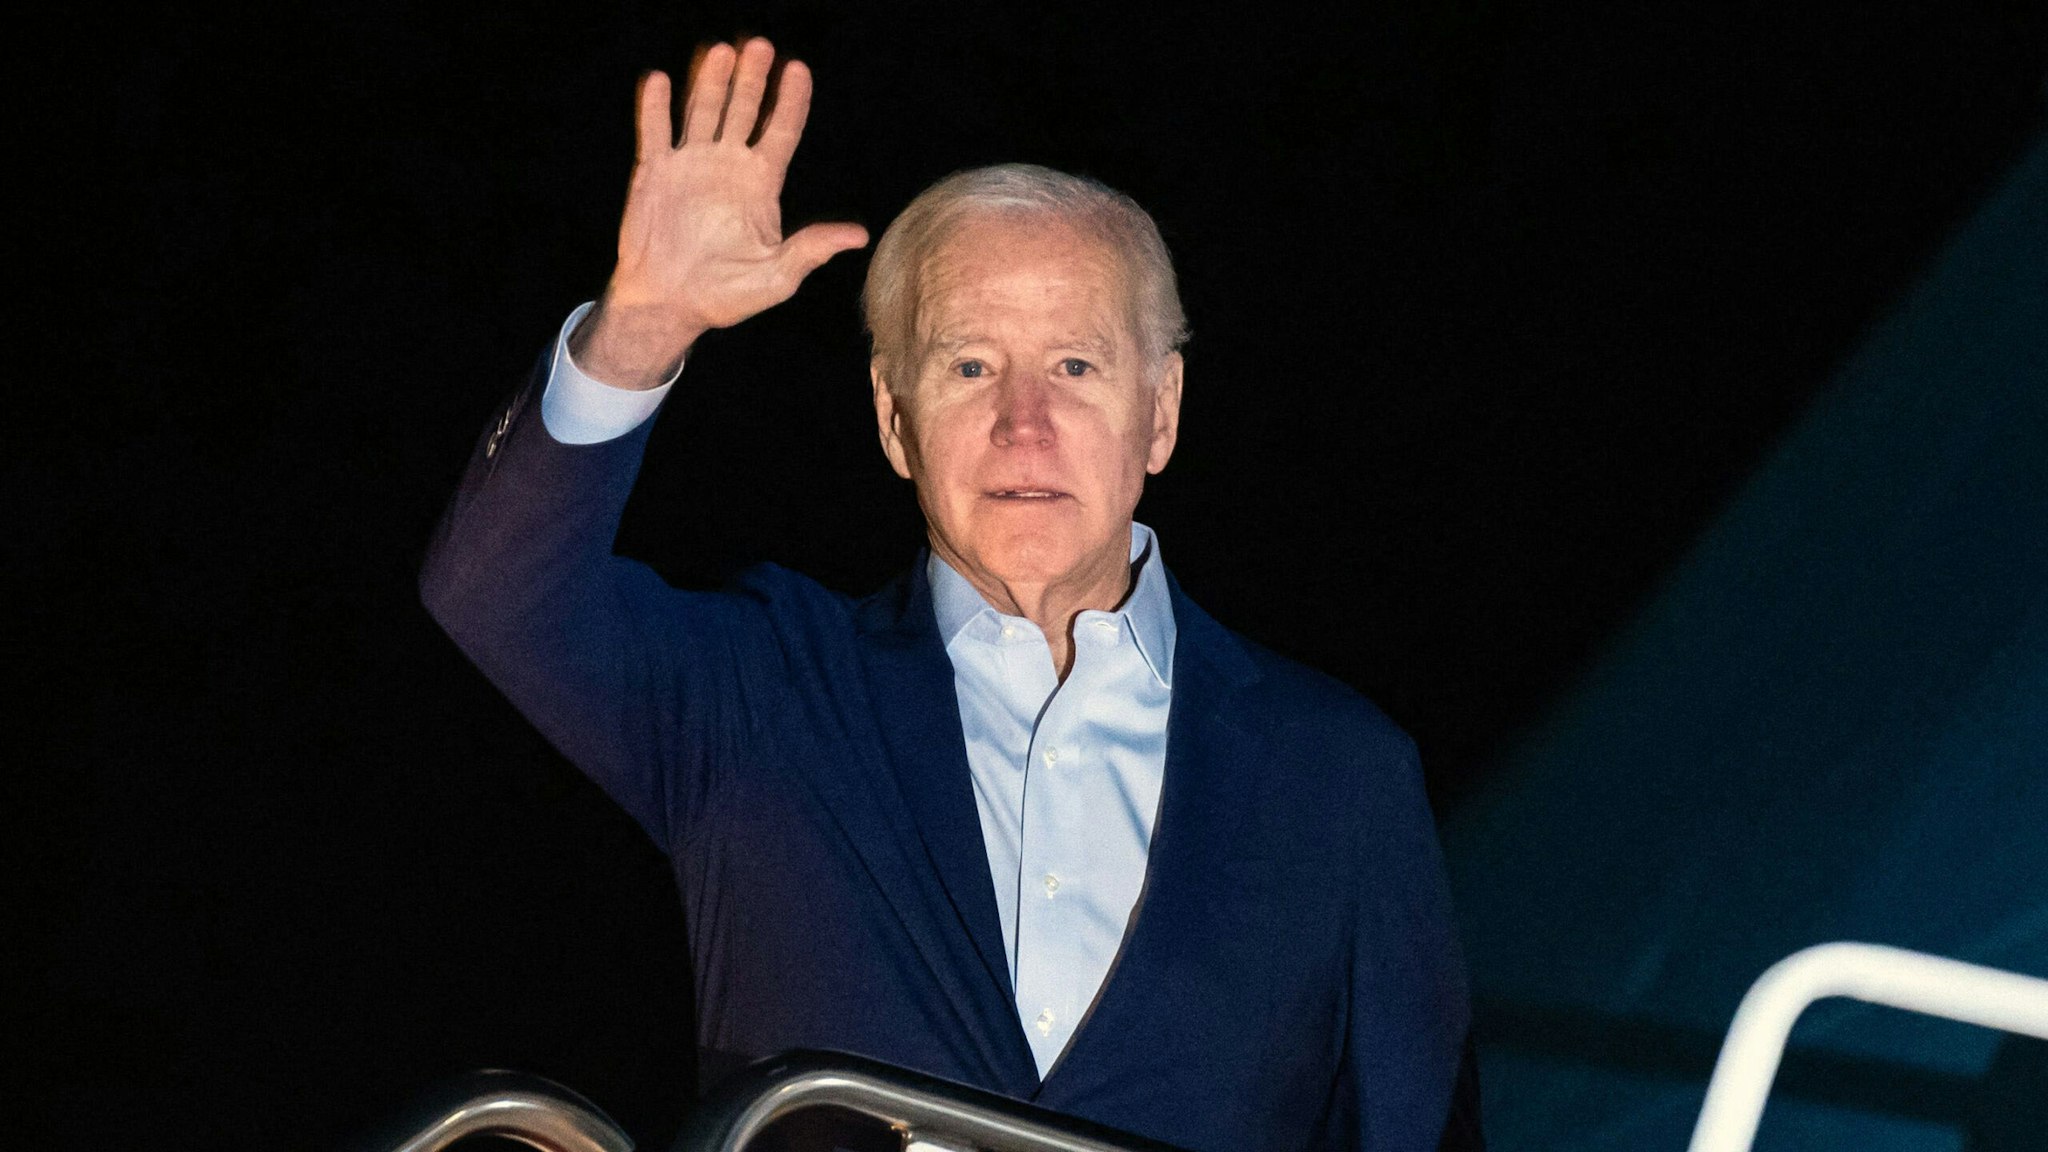 US President Joe Biden boards Air Force One at Joint Base Andrews in Maryland on December 27, 2022. - The President and First Lady are travelling to the US Virgin Islands to celebrate the New Year with family.